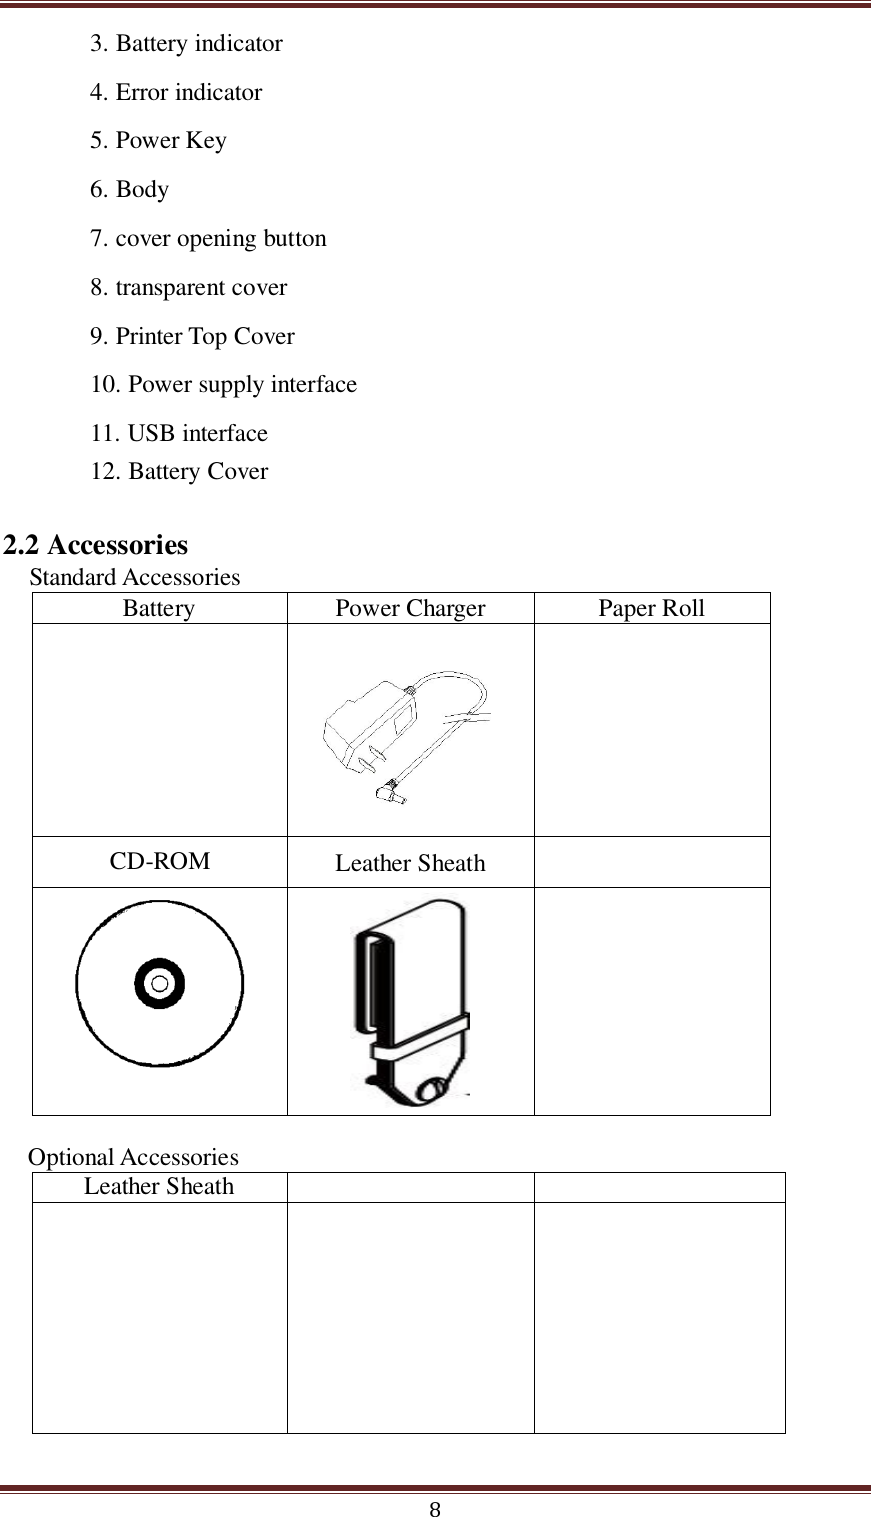  8 3. Battery indicator 4. Error indicator 5. Power Key 6. Body 7. cover opening button 8. transparent cover 9. Printer Top Cover 10. Power supply interface 11. USB interface 12. Battery Cover  2.2 Accessories   Standard Accessories                   Optional Accessories Leather Sheath              Battery  Power Charger  Paper Roll      CD-ROM  Leather Sheath      